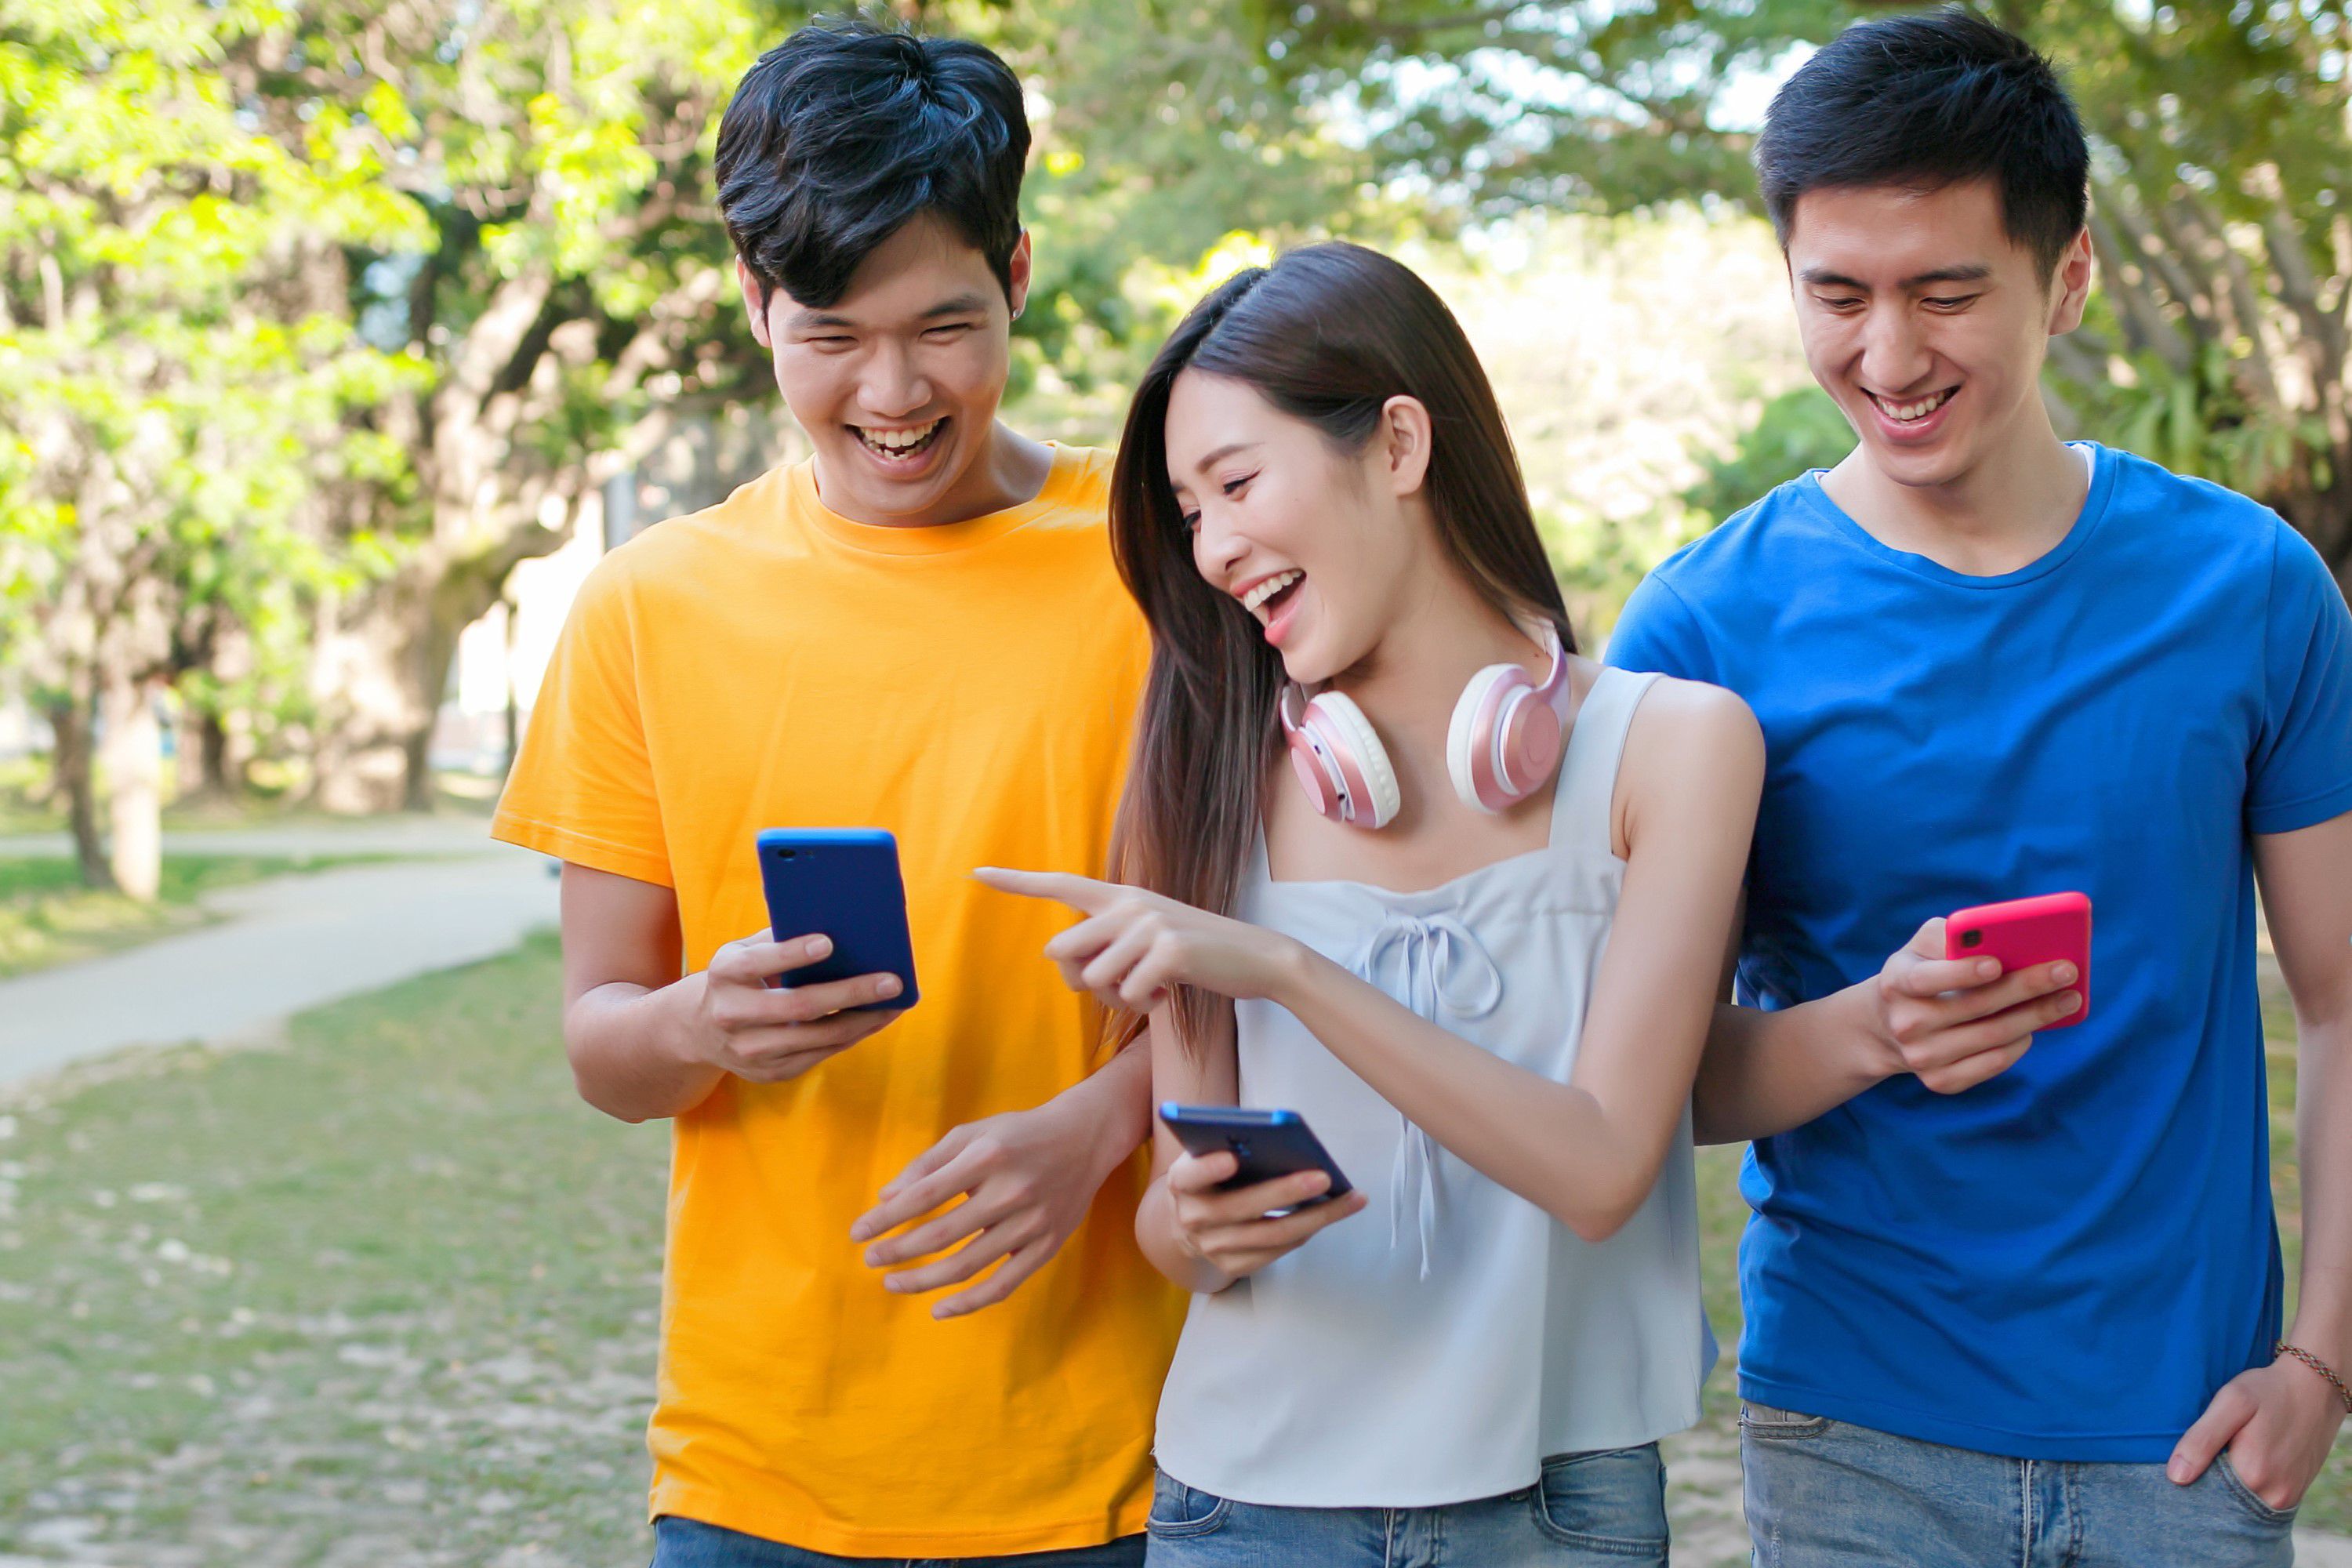 Three teens with phones smiling